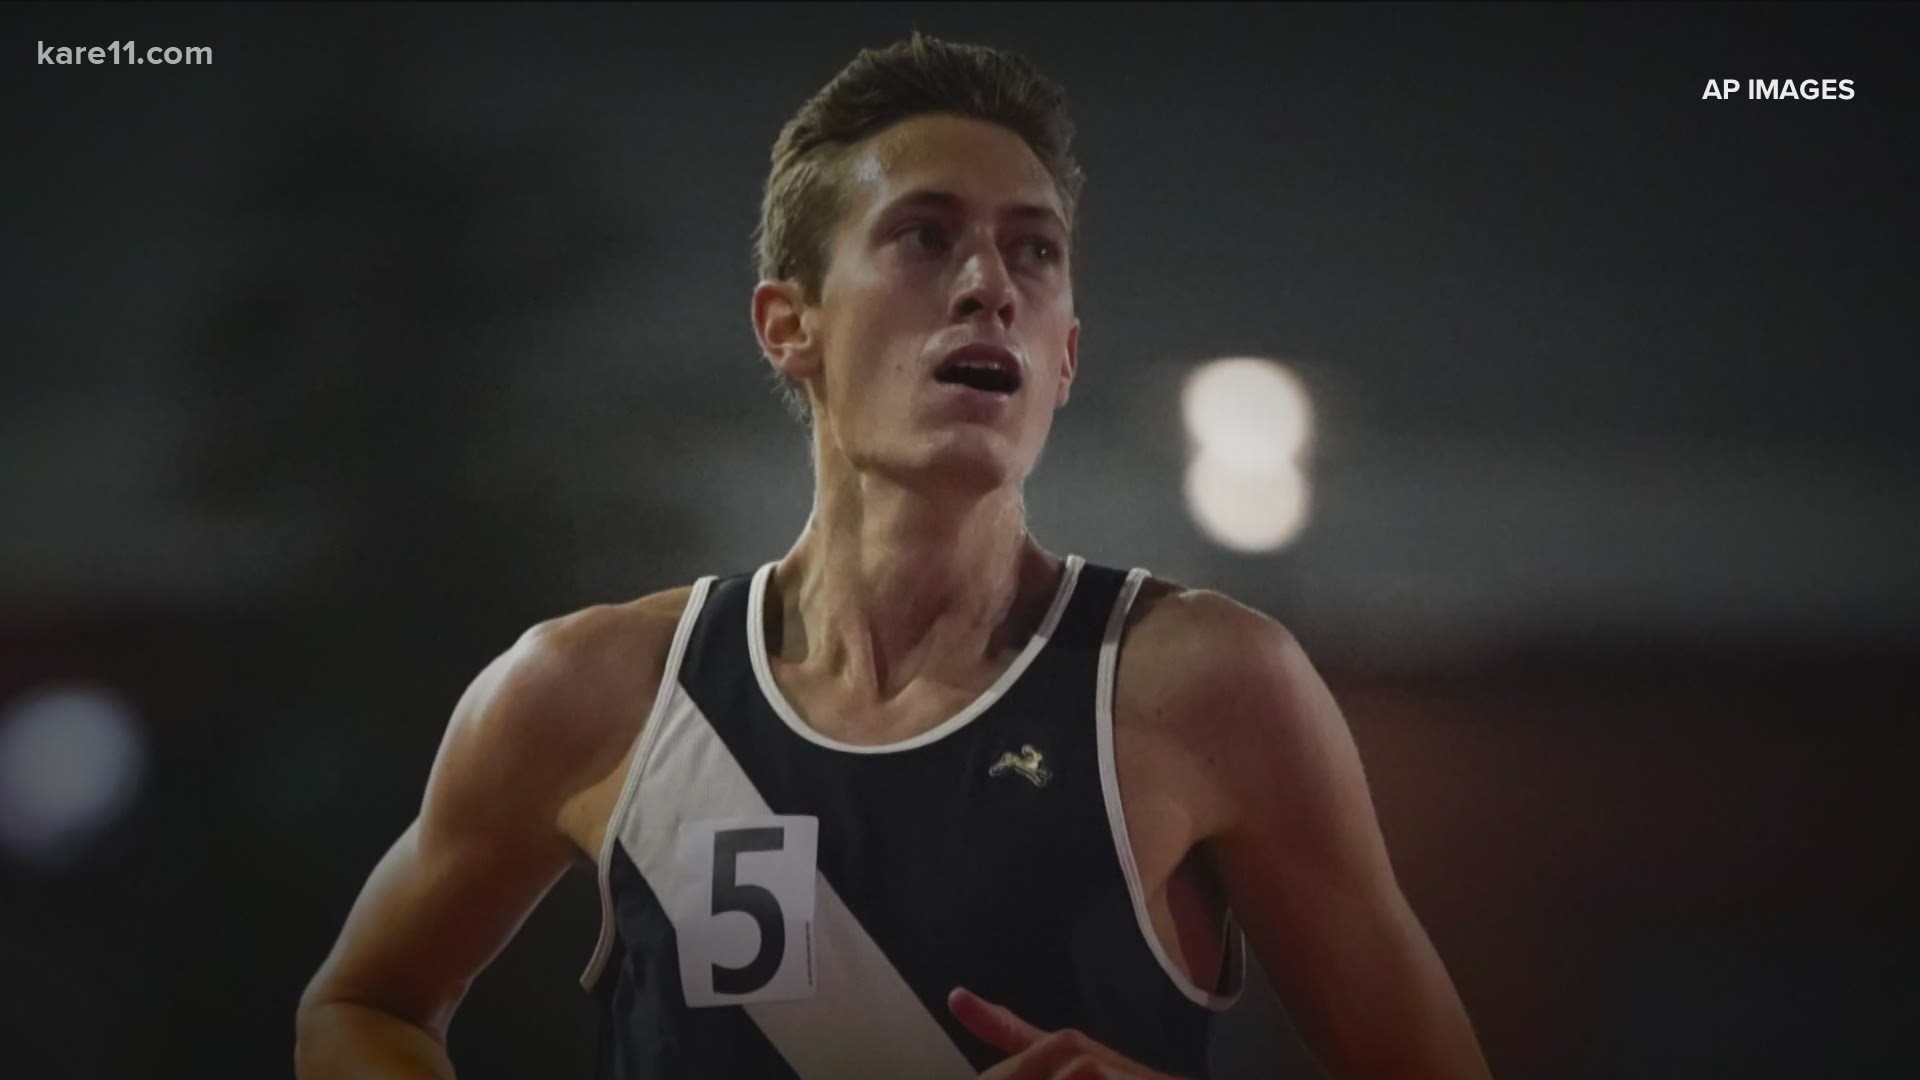 He placed third in the men's 3,000-meter steeplechase final and punched his ticket to Tokyo with the top three finish last month